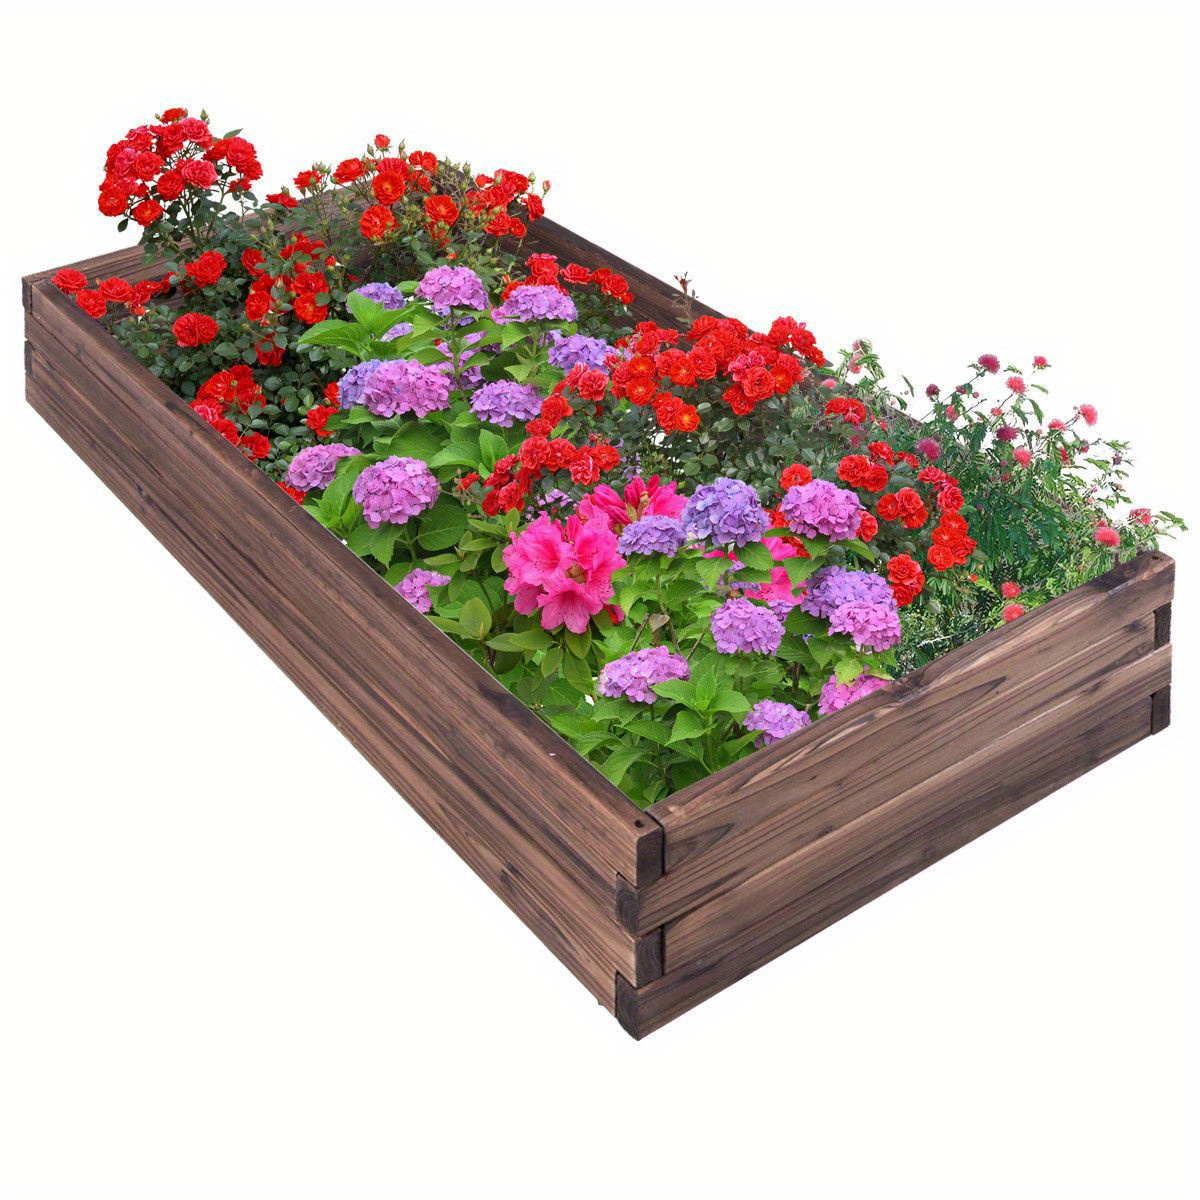 

Safstar Wooden Raised Garden Bed Kit Elevated Planter Box For Growing Herbs